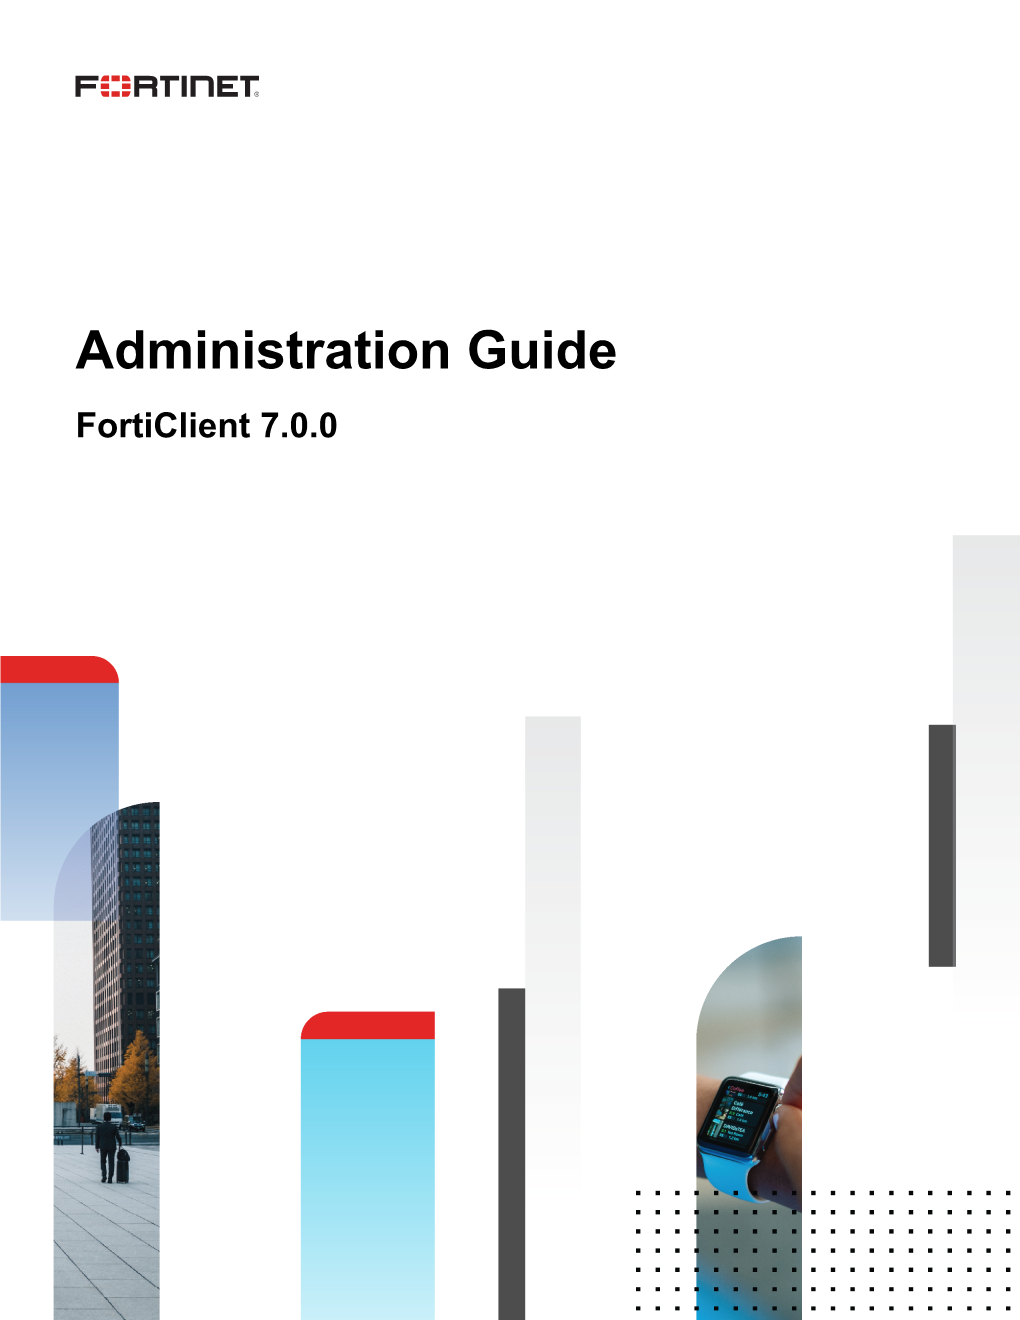 Forticlient Administration Guide